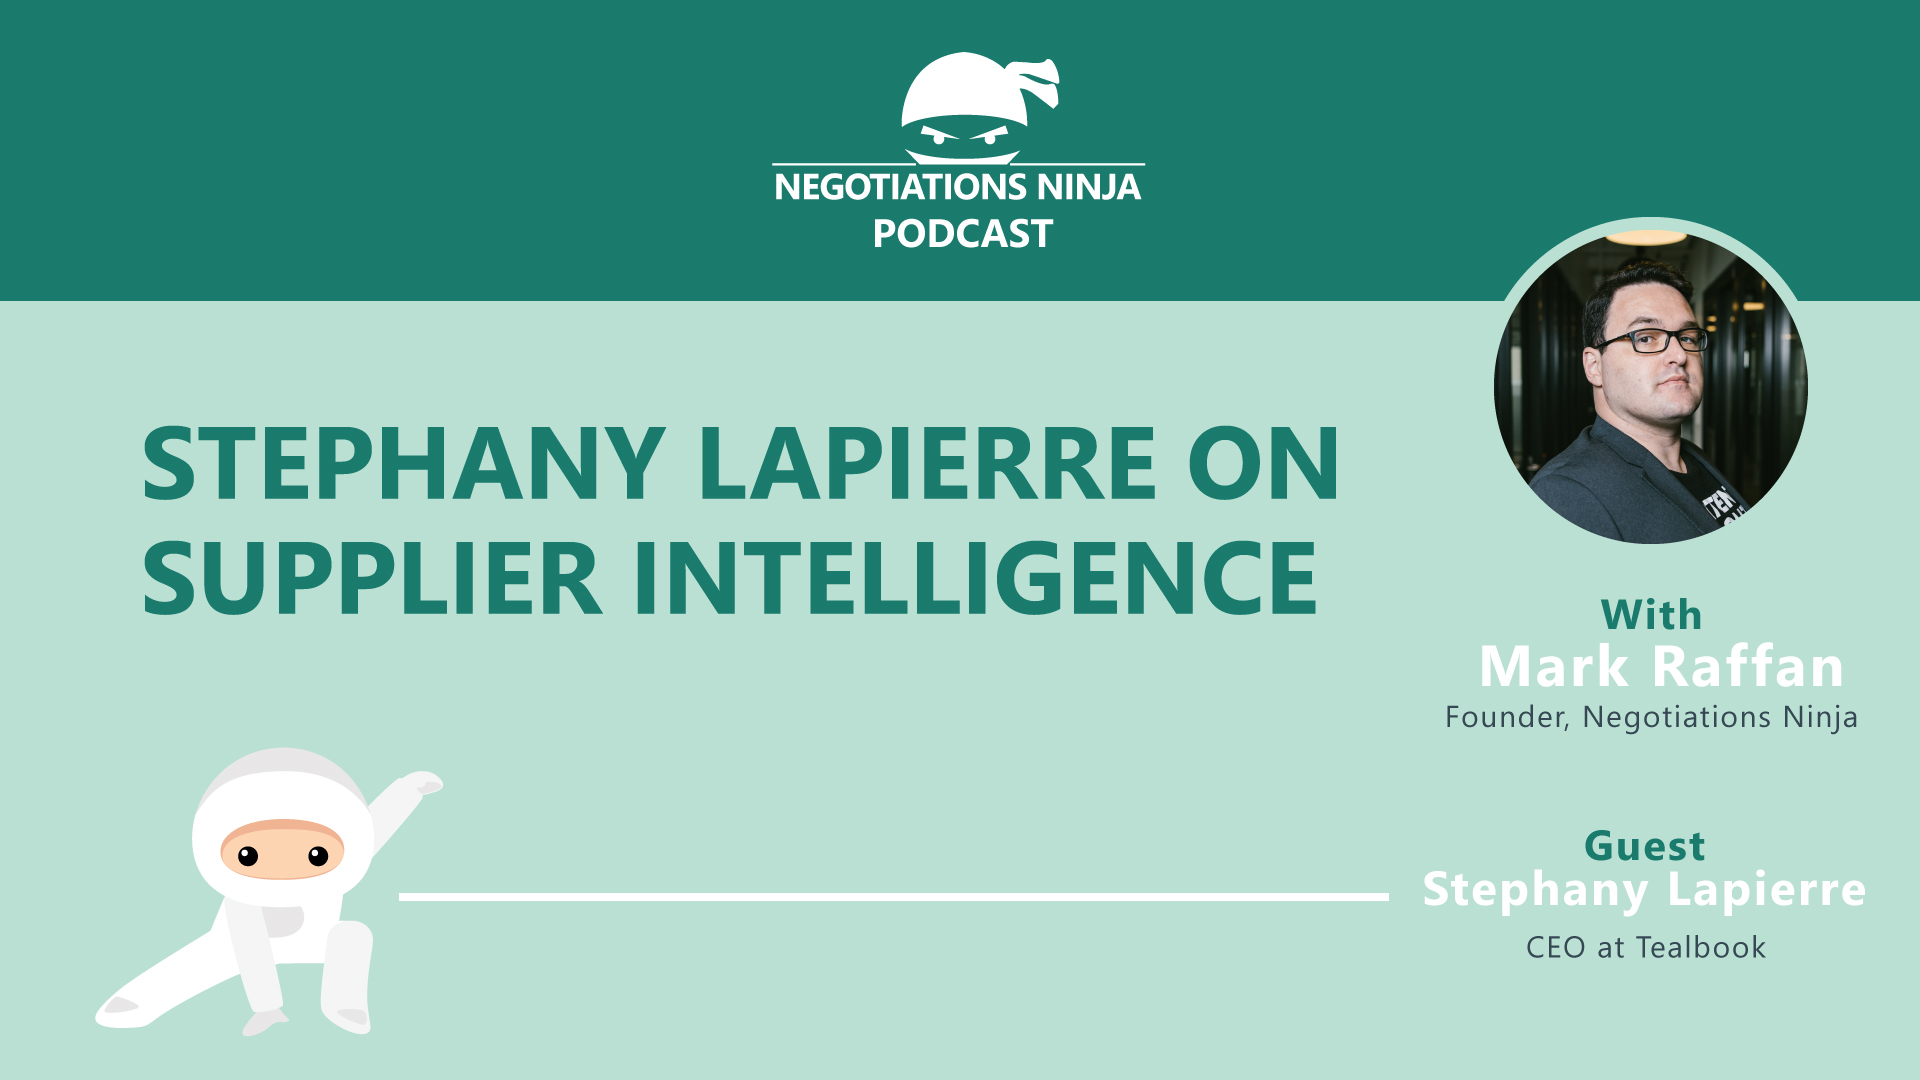 Nn podcast banners 4 stephany lapierre